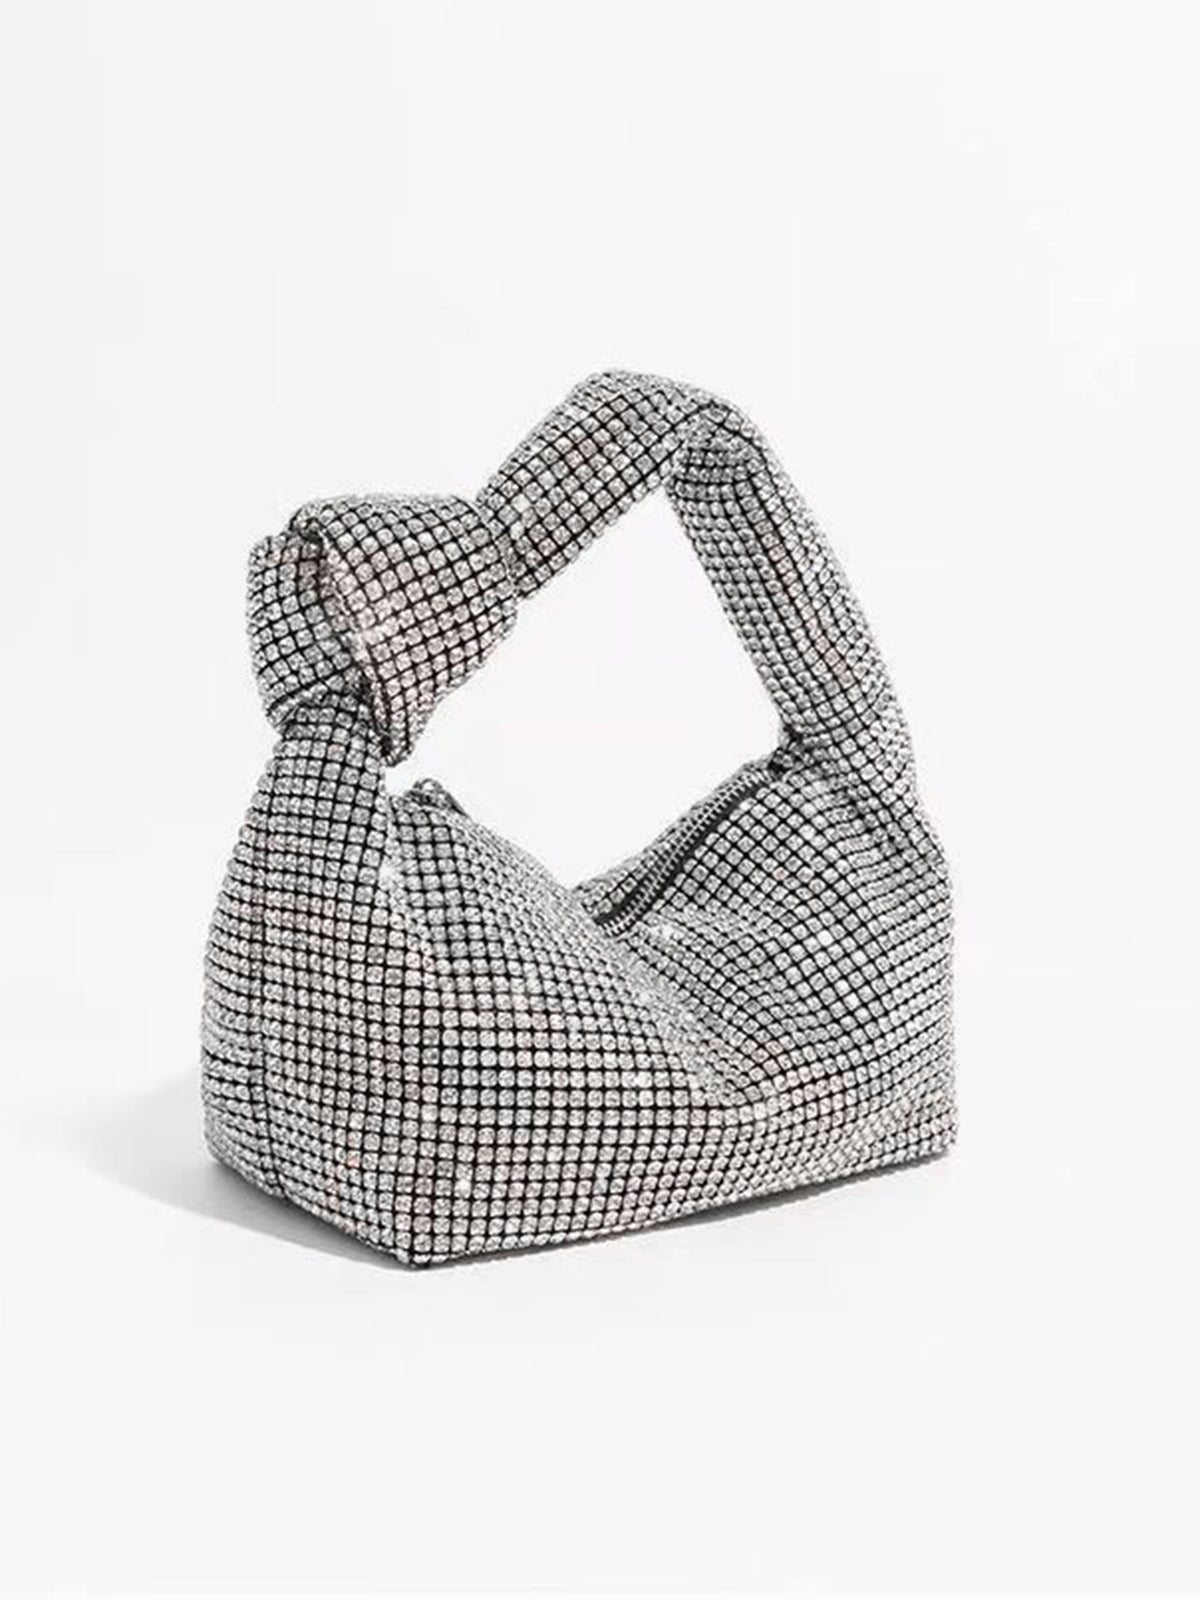 Diamante Knotted Bag